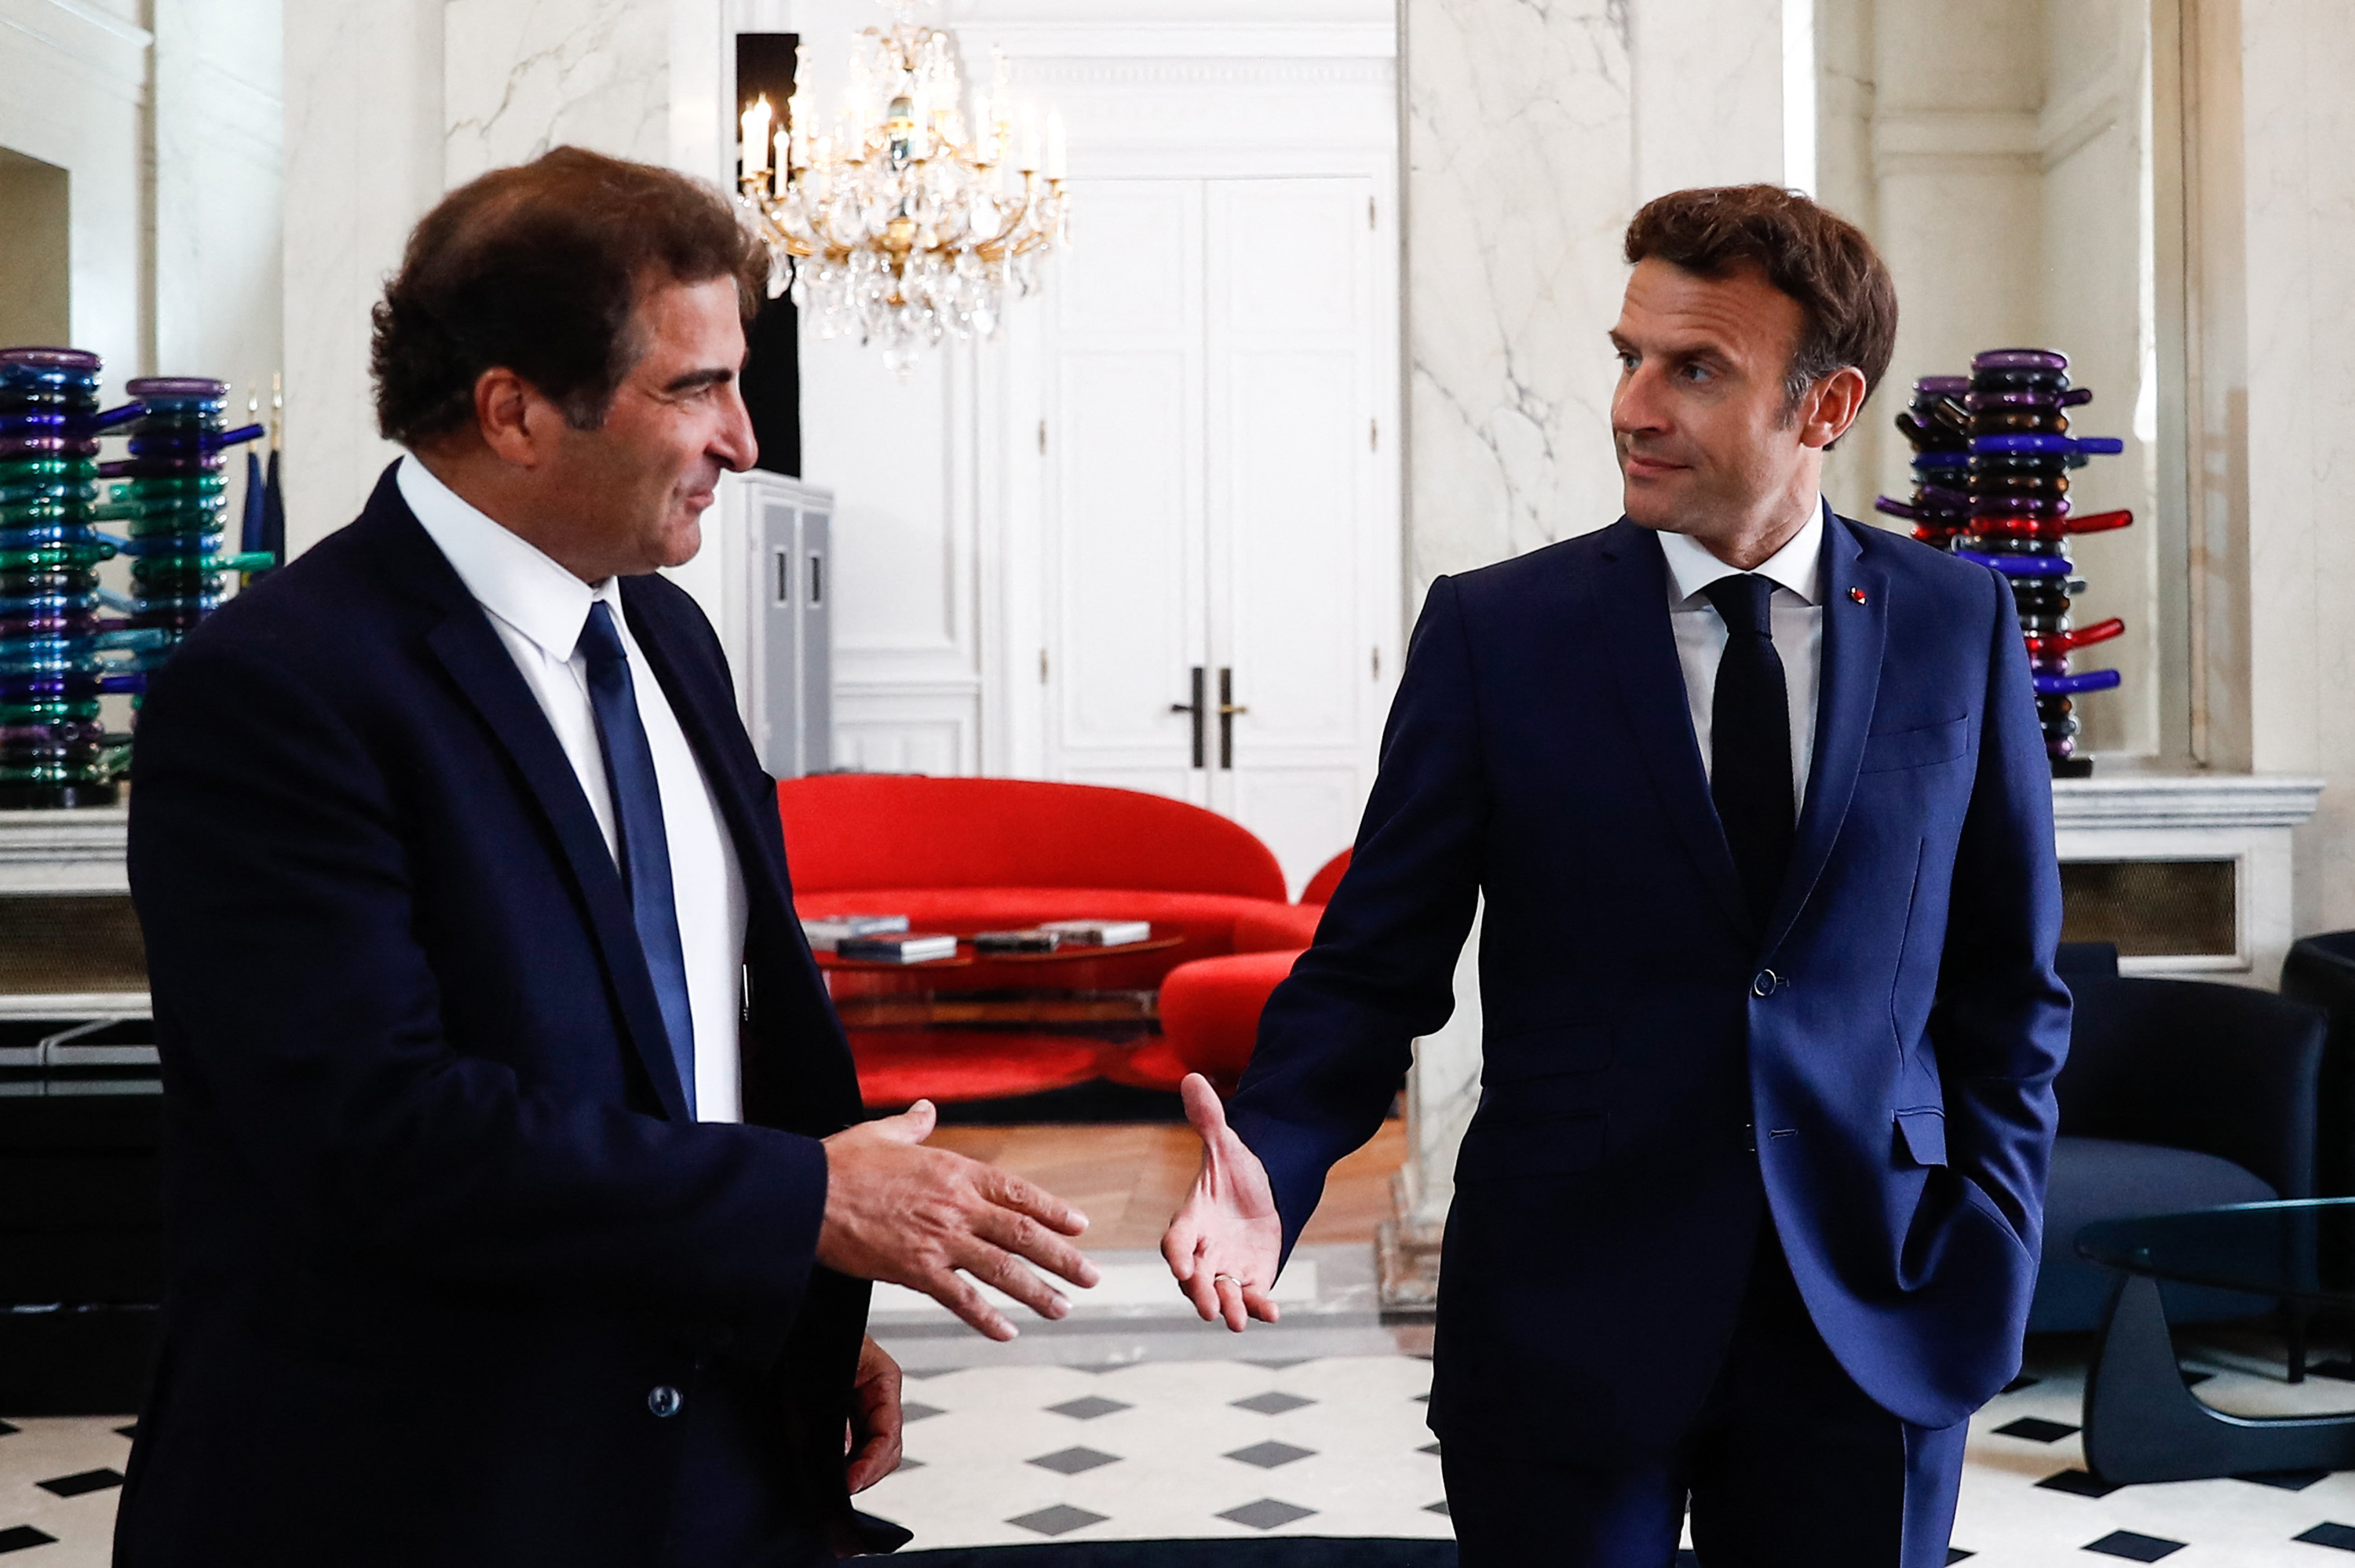 Emmanuel Macron shakes hands with Christian Jacob after a meeting at the Elysee Palace, in Paris, on June 21.